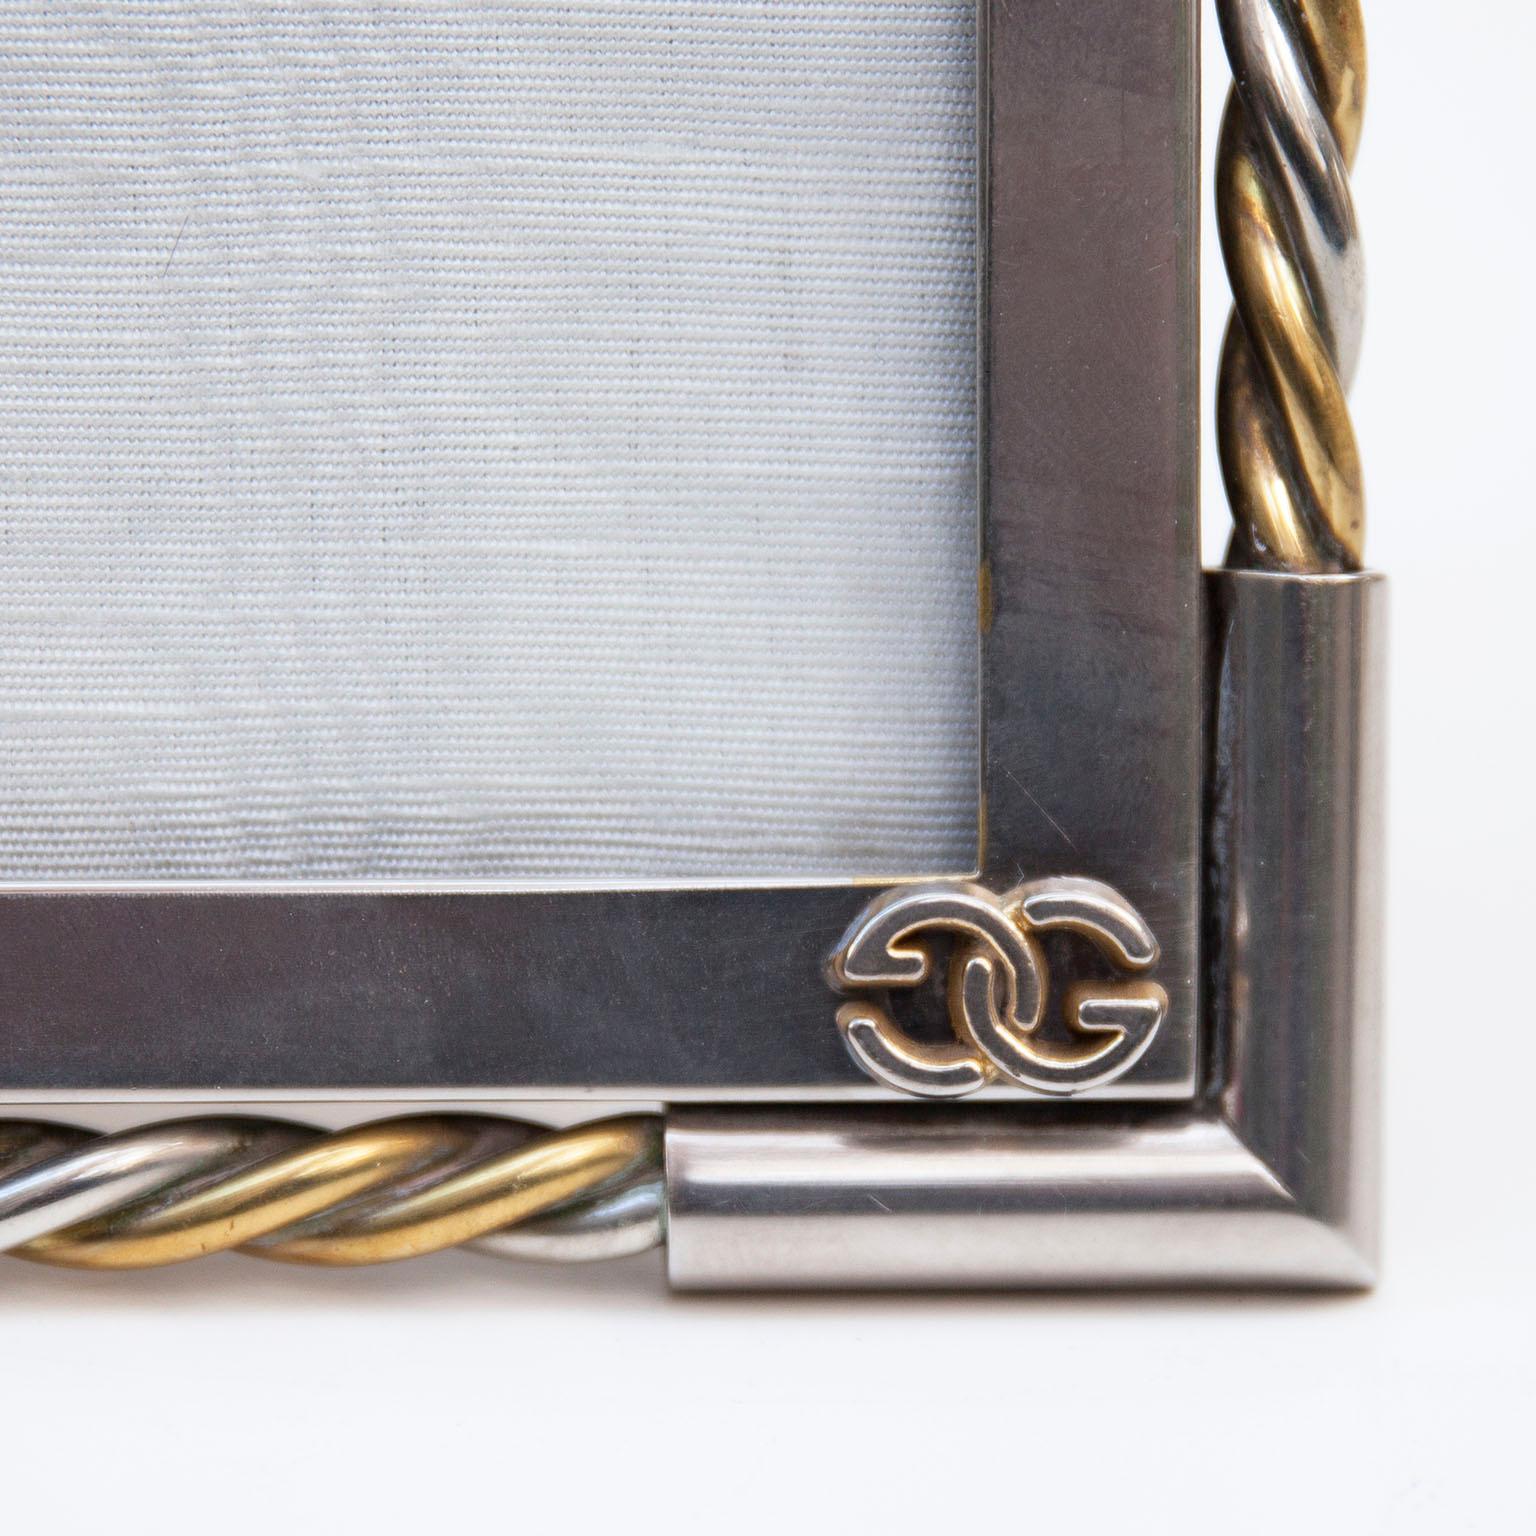 Late 20th Century Luxury Vintage Gucci Picture Frame, 1970